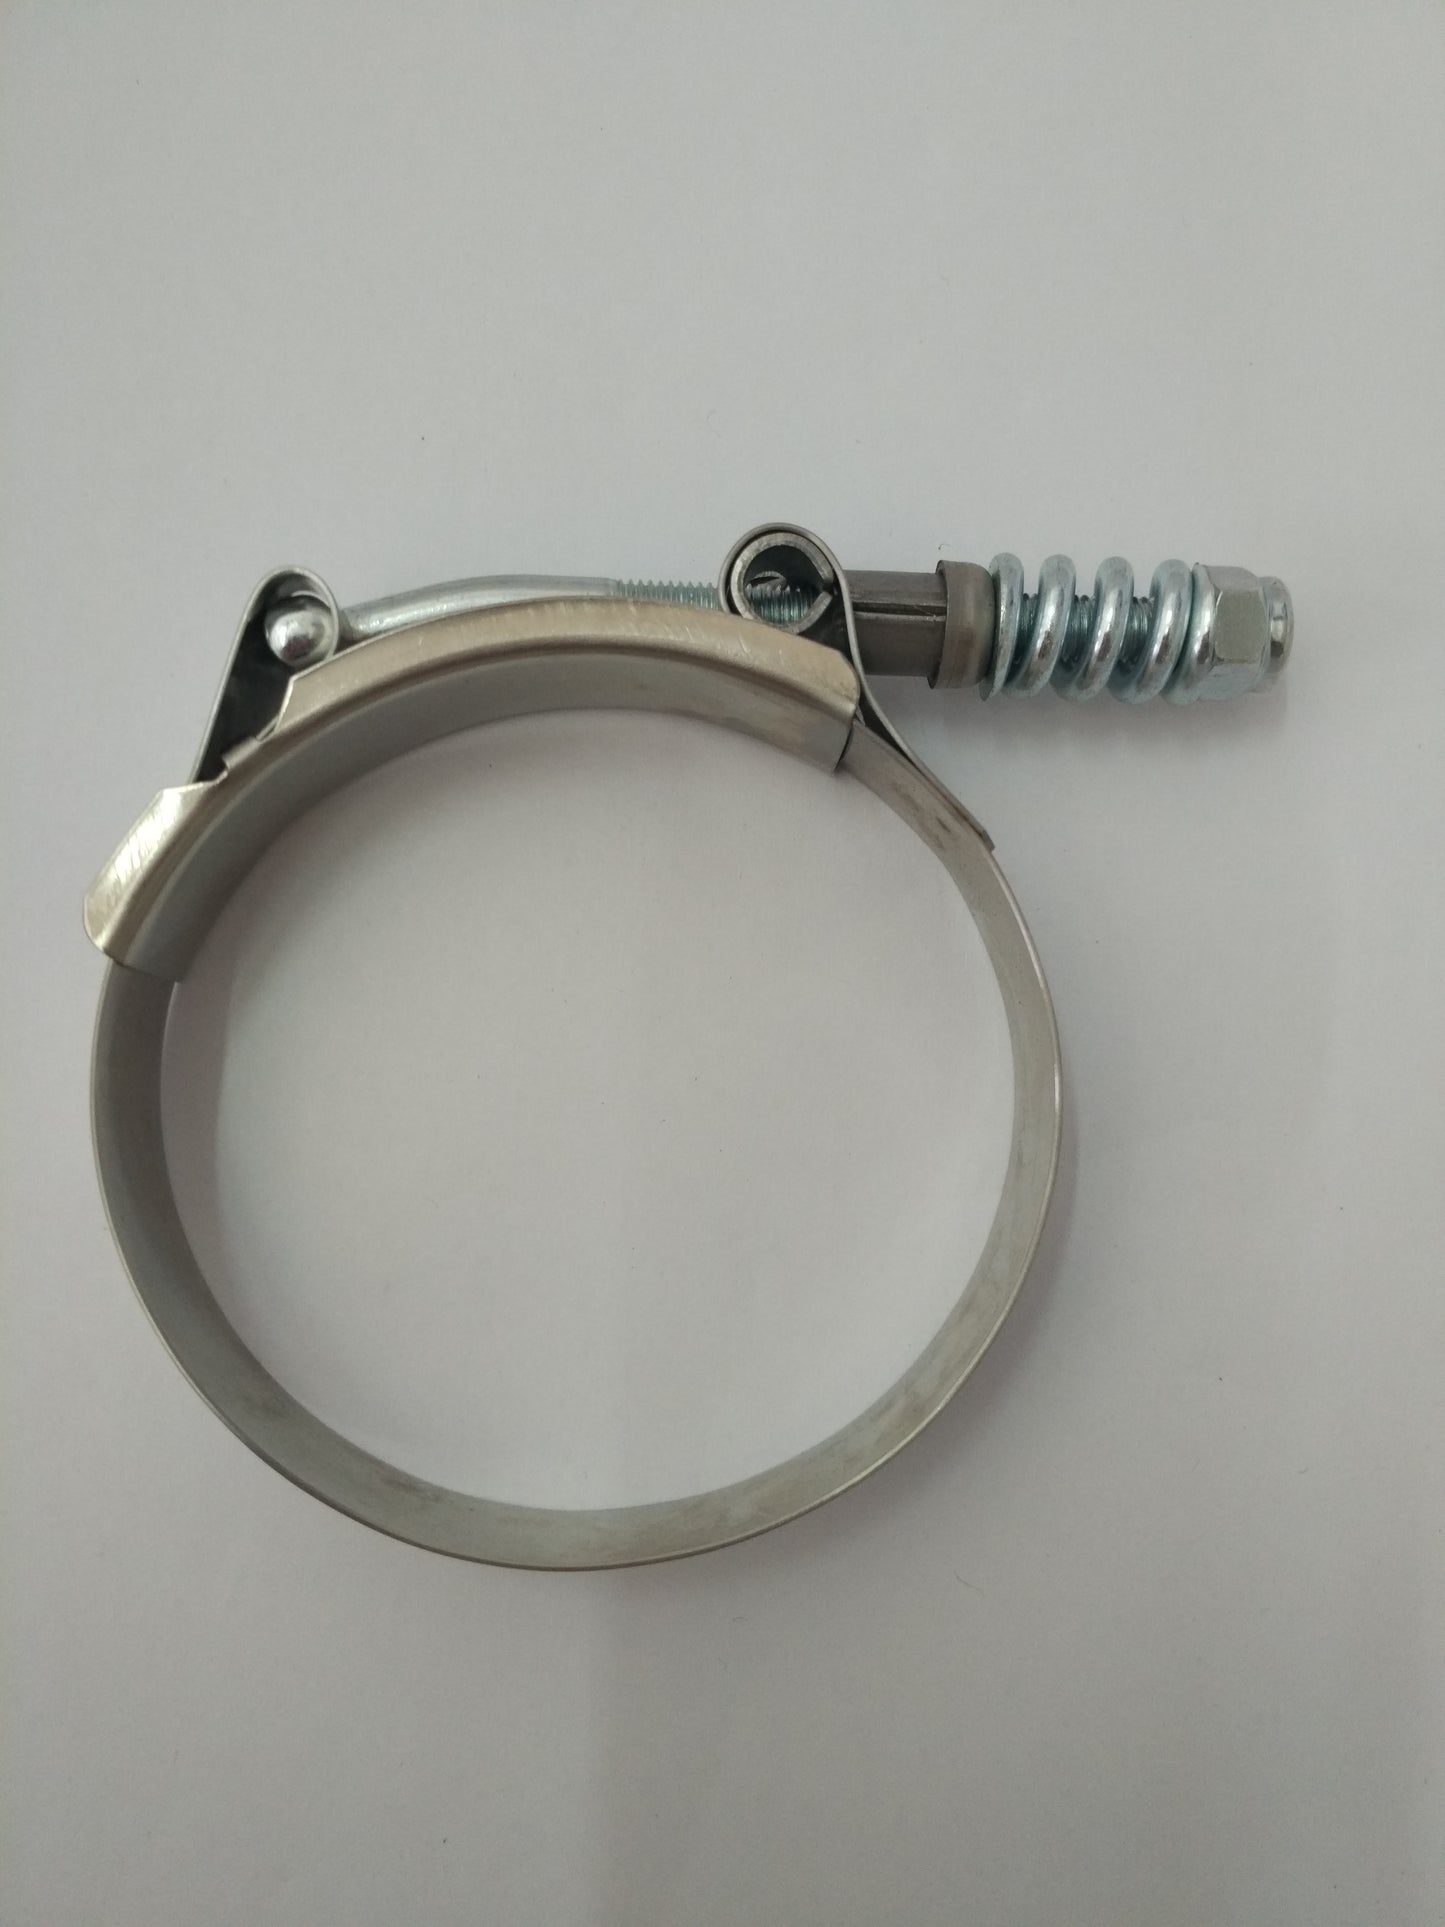 2-3/4 To 3-1/16 T-Bolt Spring Loaded Hose Clamp